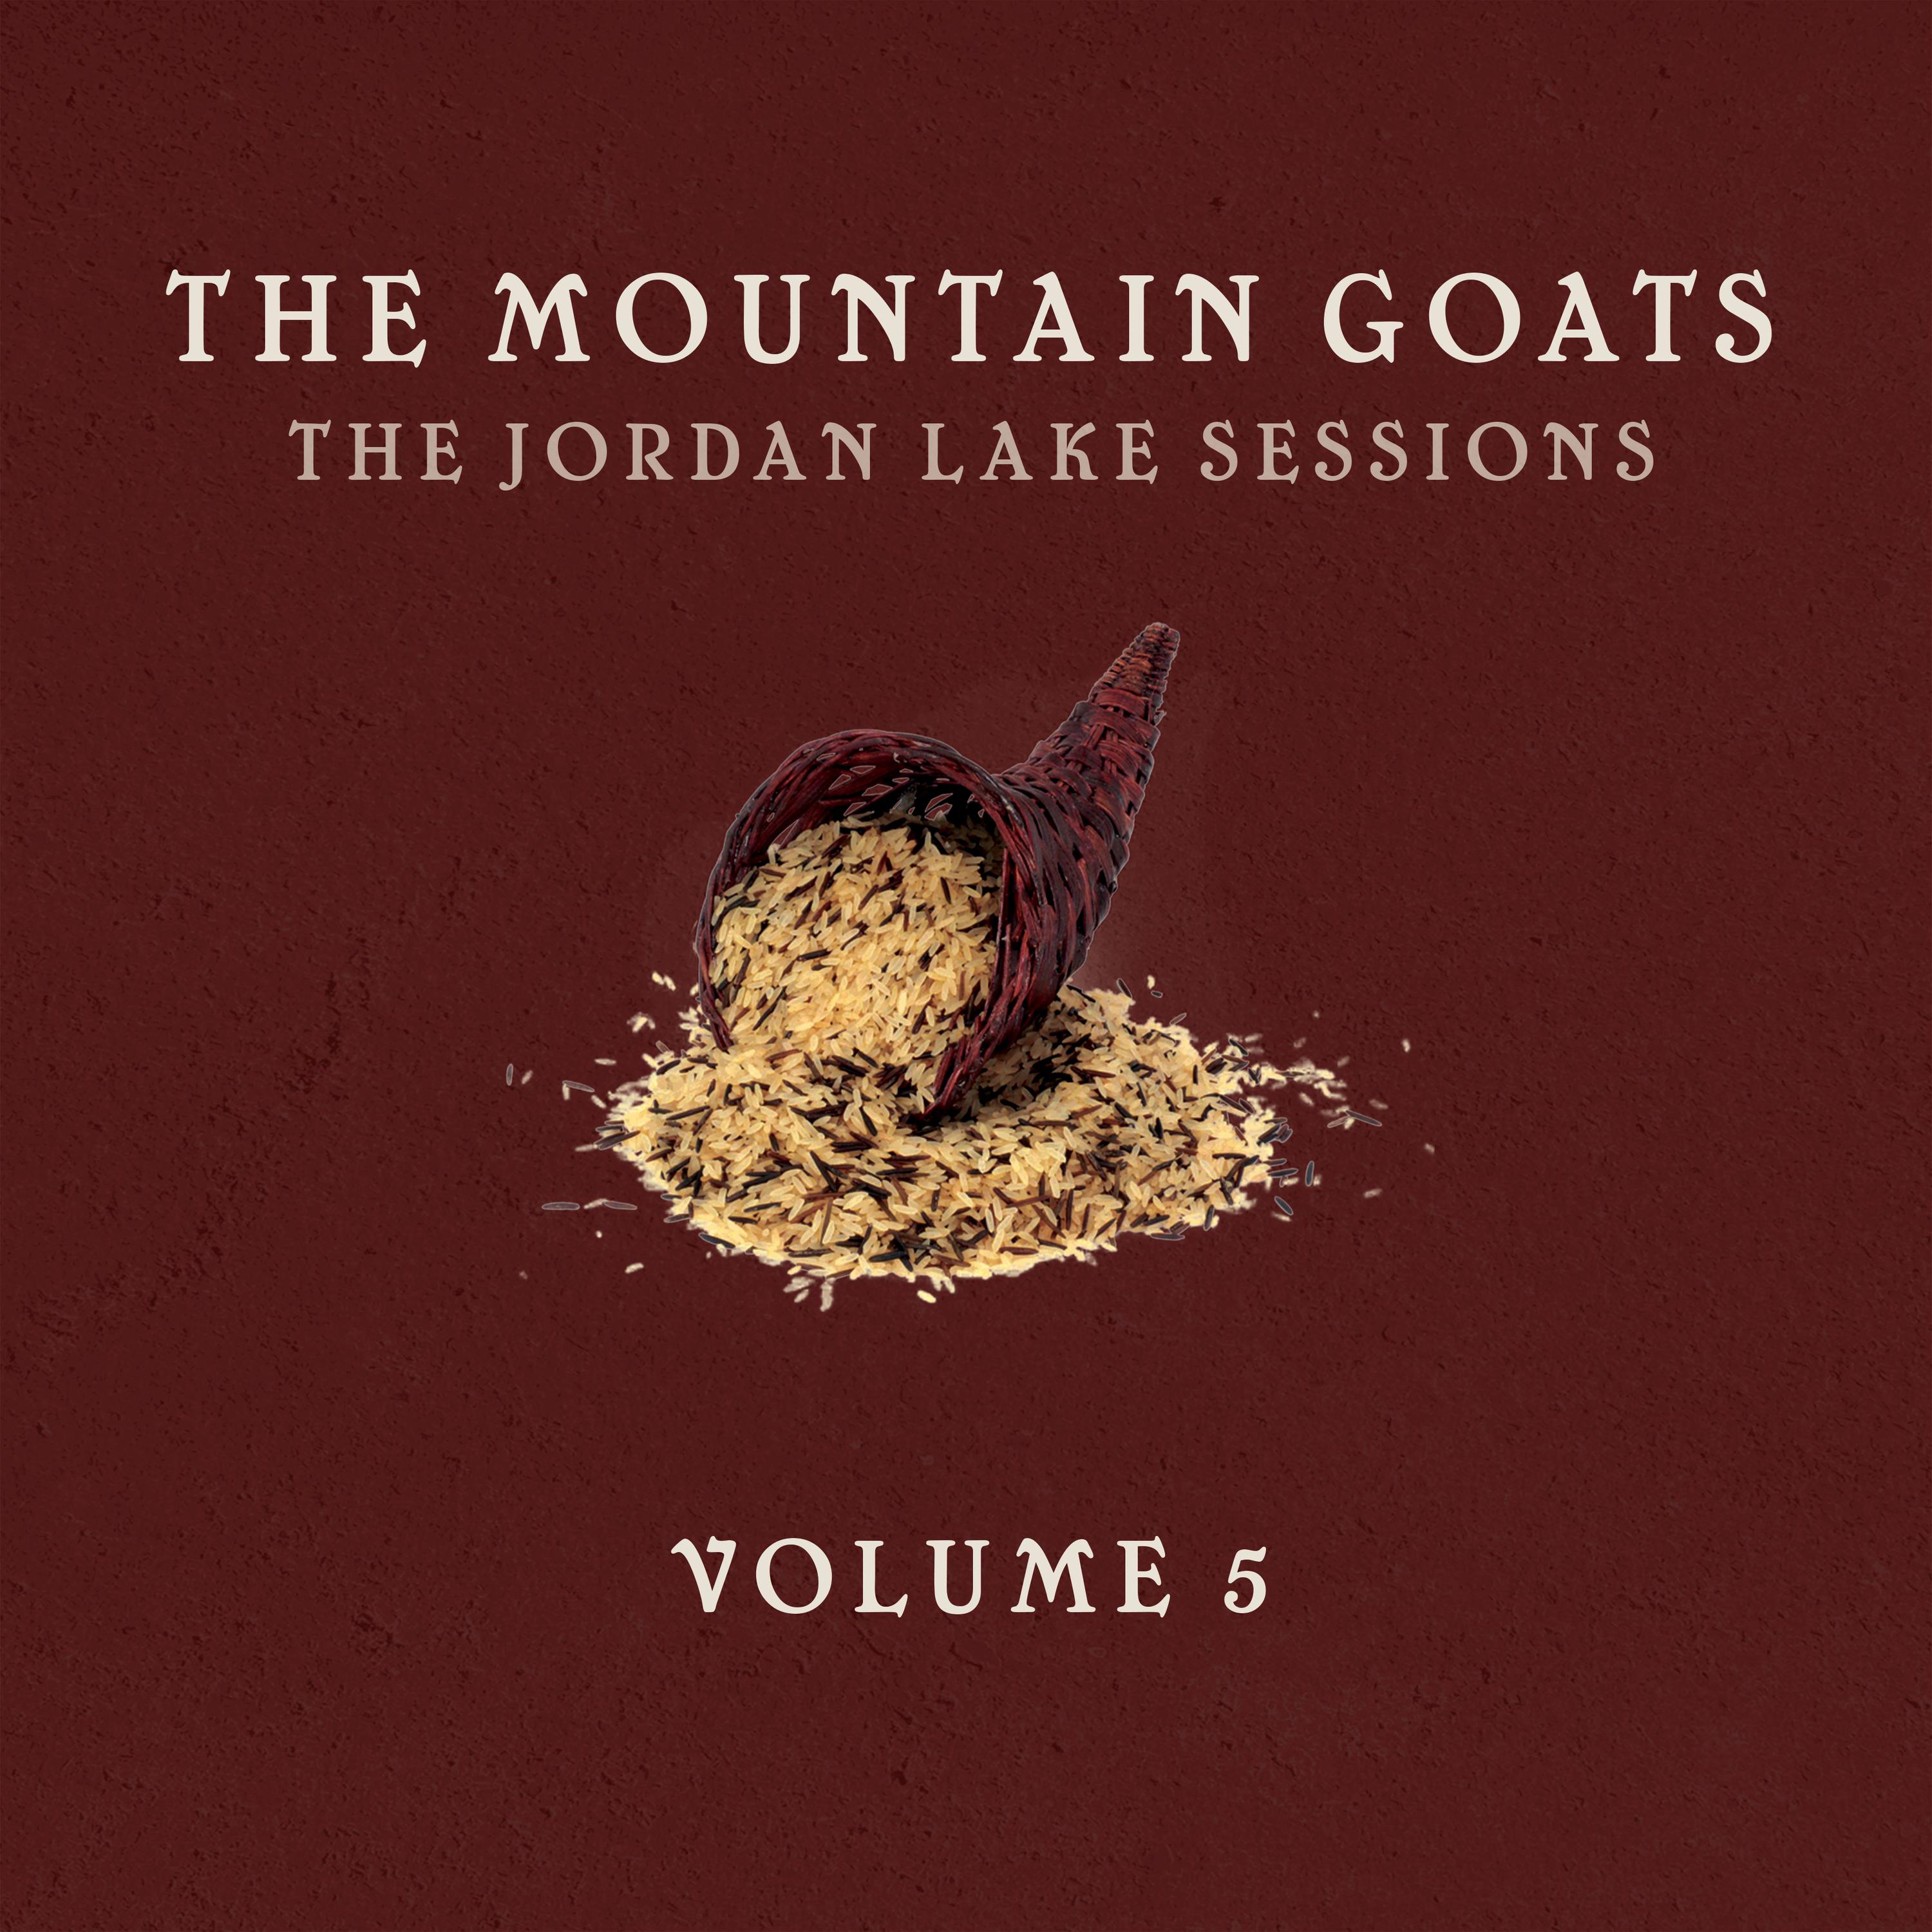 The Mountain Goats - Bleed Out (The Jordan Lake Sessions Volume 5)